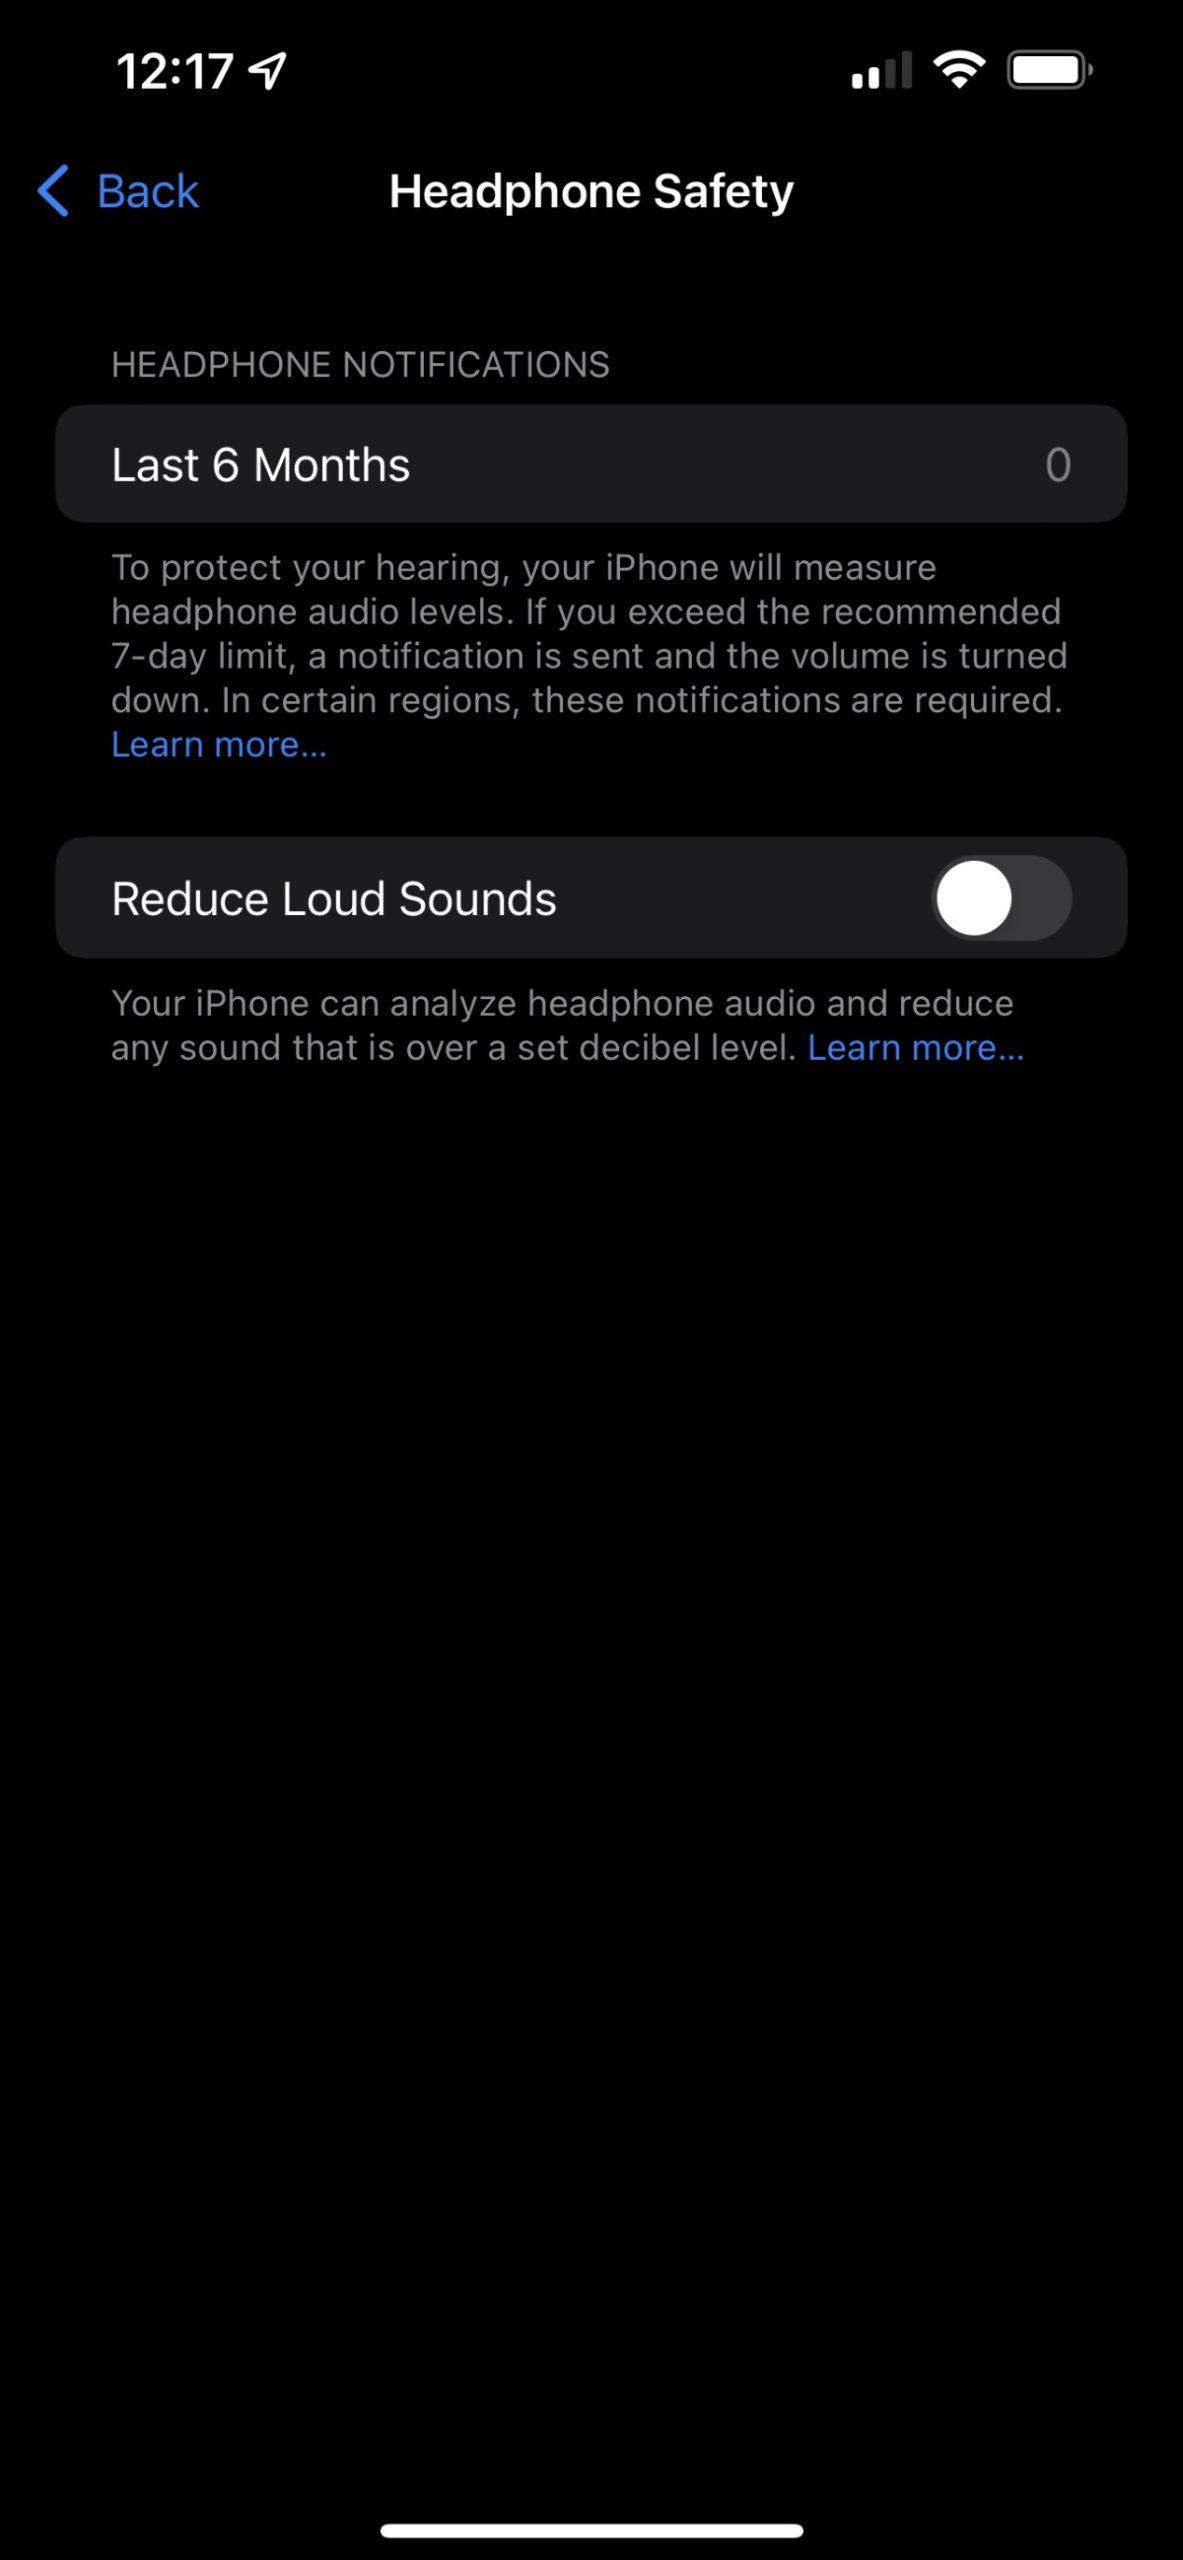 How to use Reduce Loud Sounds in iOS 15 to help protect your hearing 